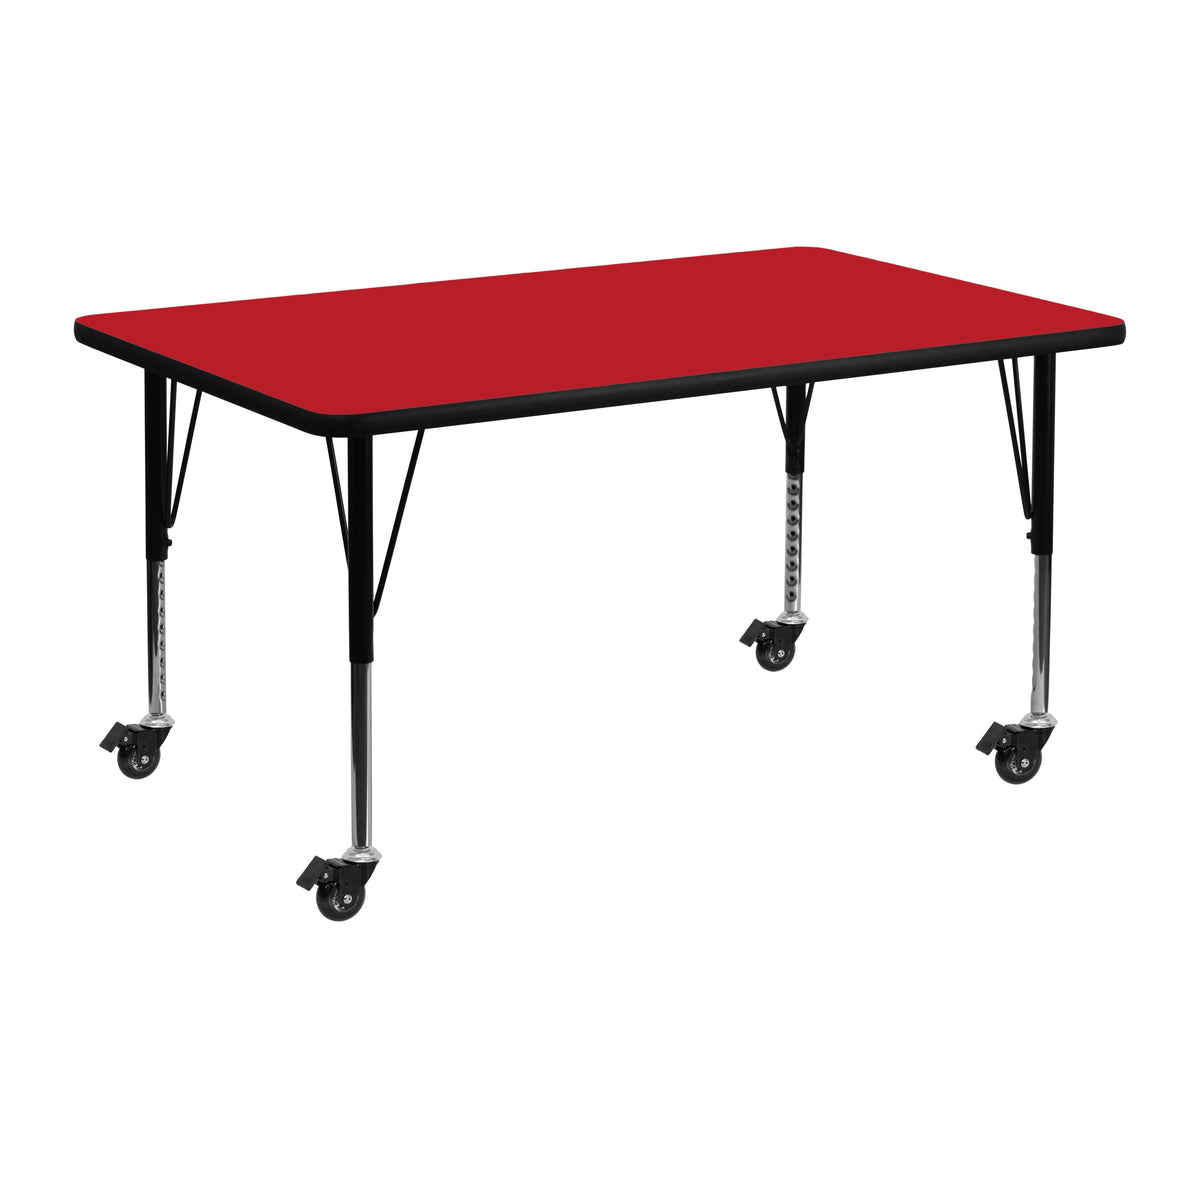 Red |#| Mobile 24inchW x 48inchL Rectangular Red HP Laminate Adjustable Activity Table